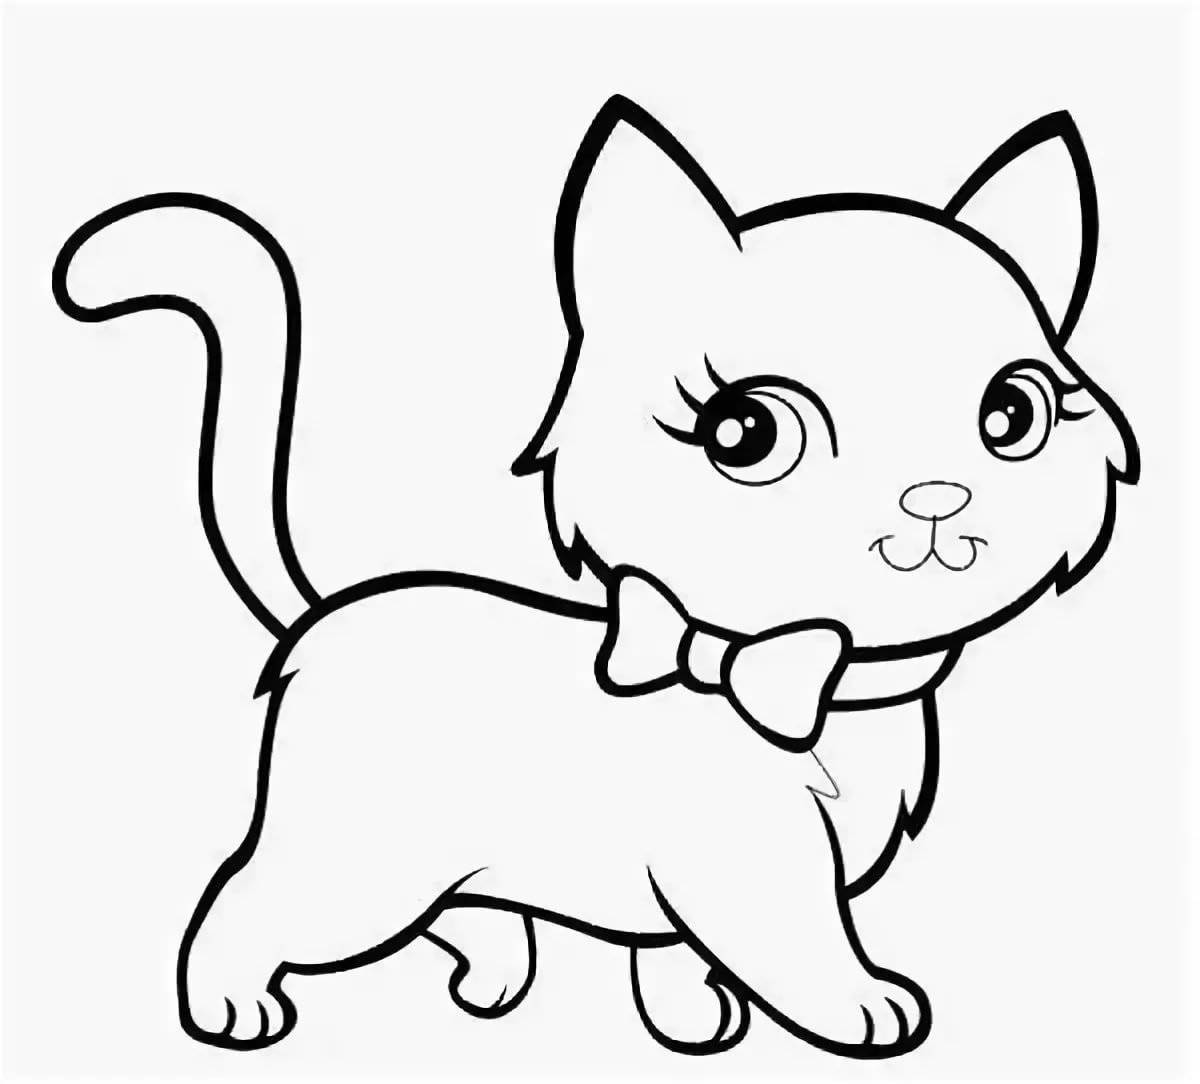 Fun coloring cat for children 3-4 years old